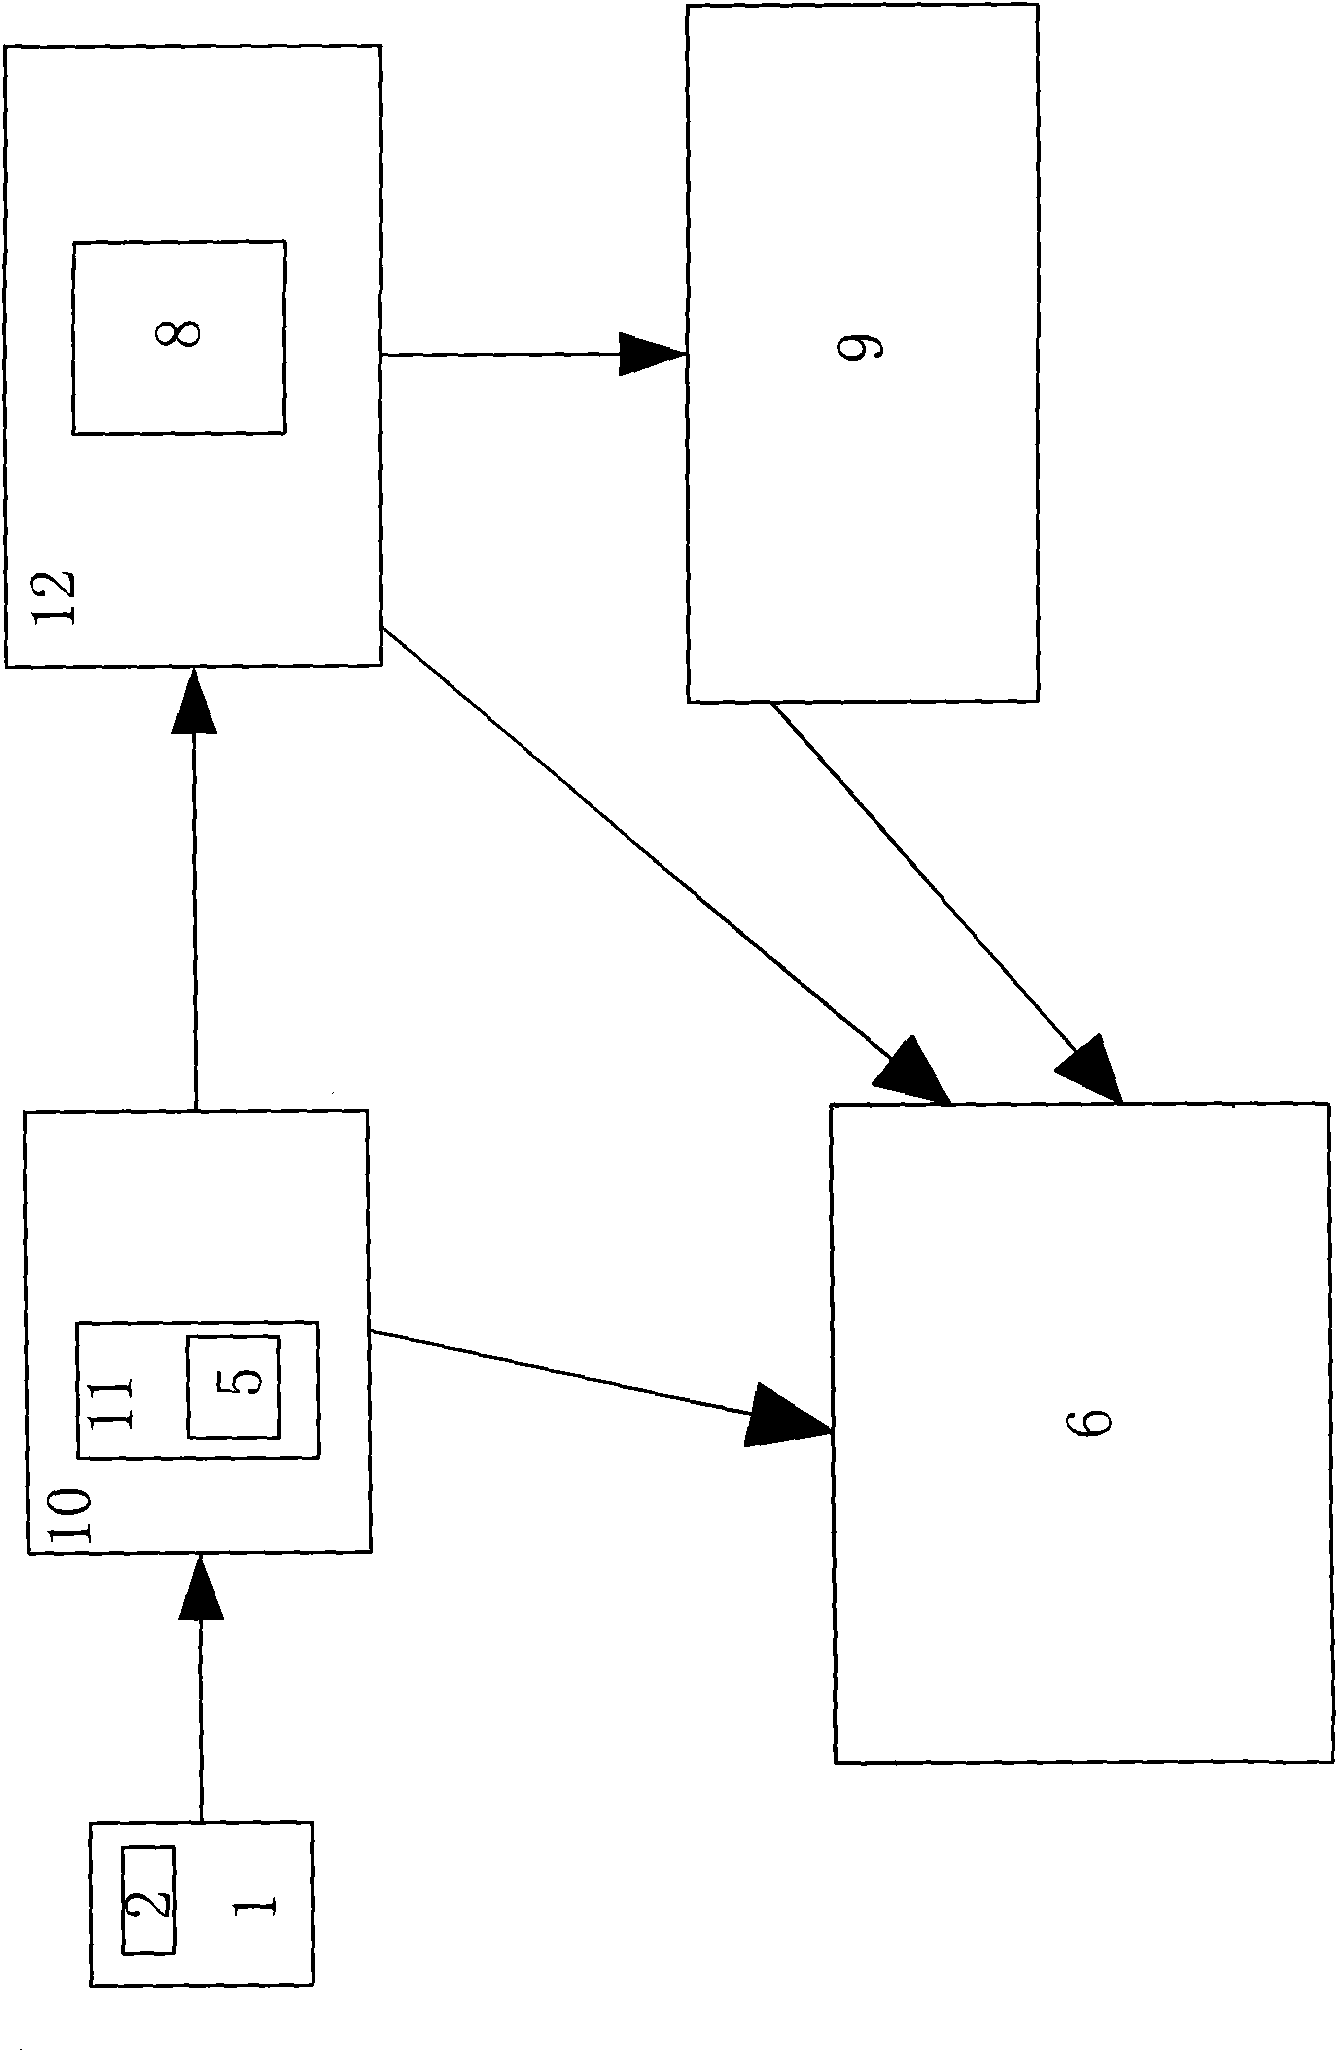 Management method for collecting and calculating garbage